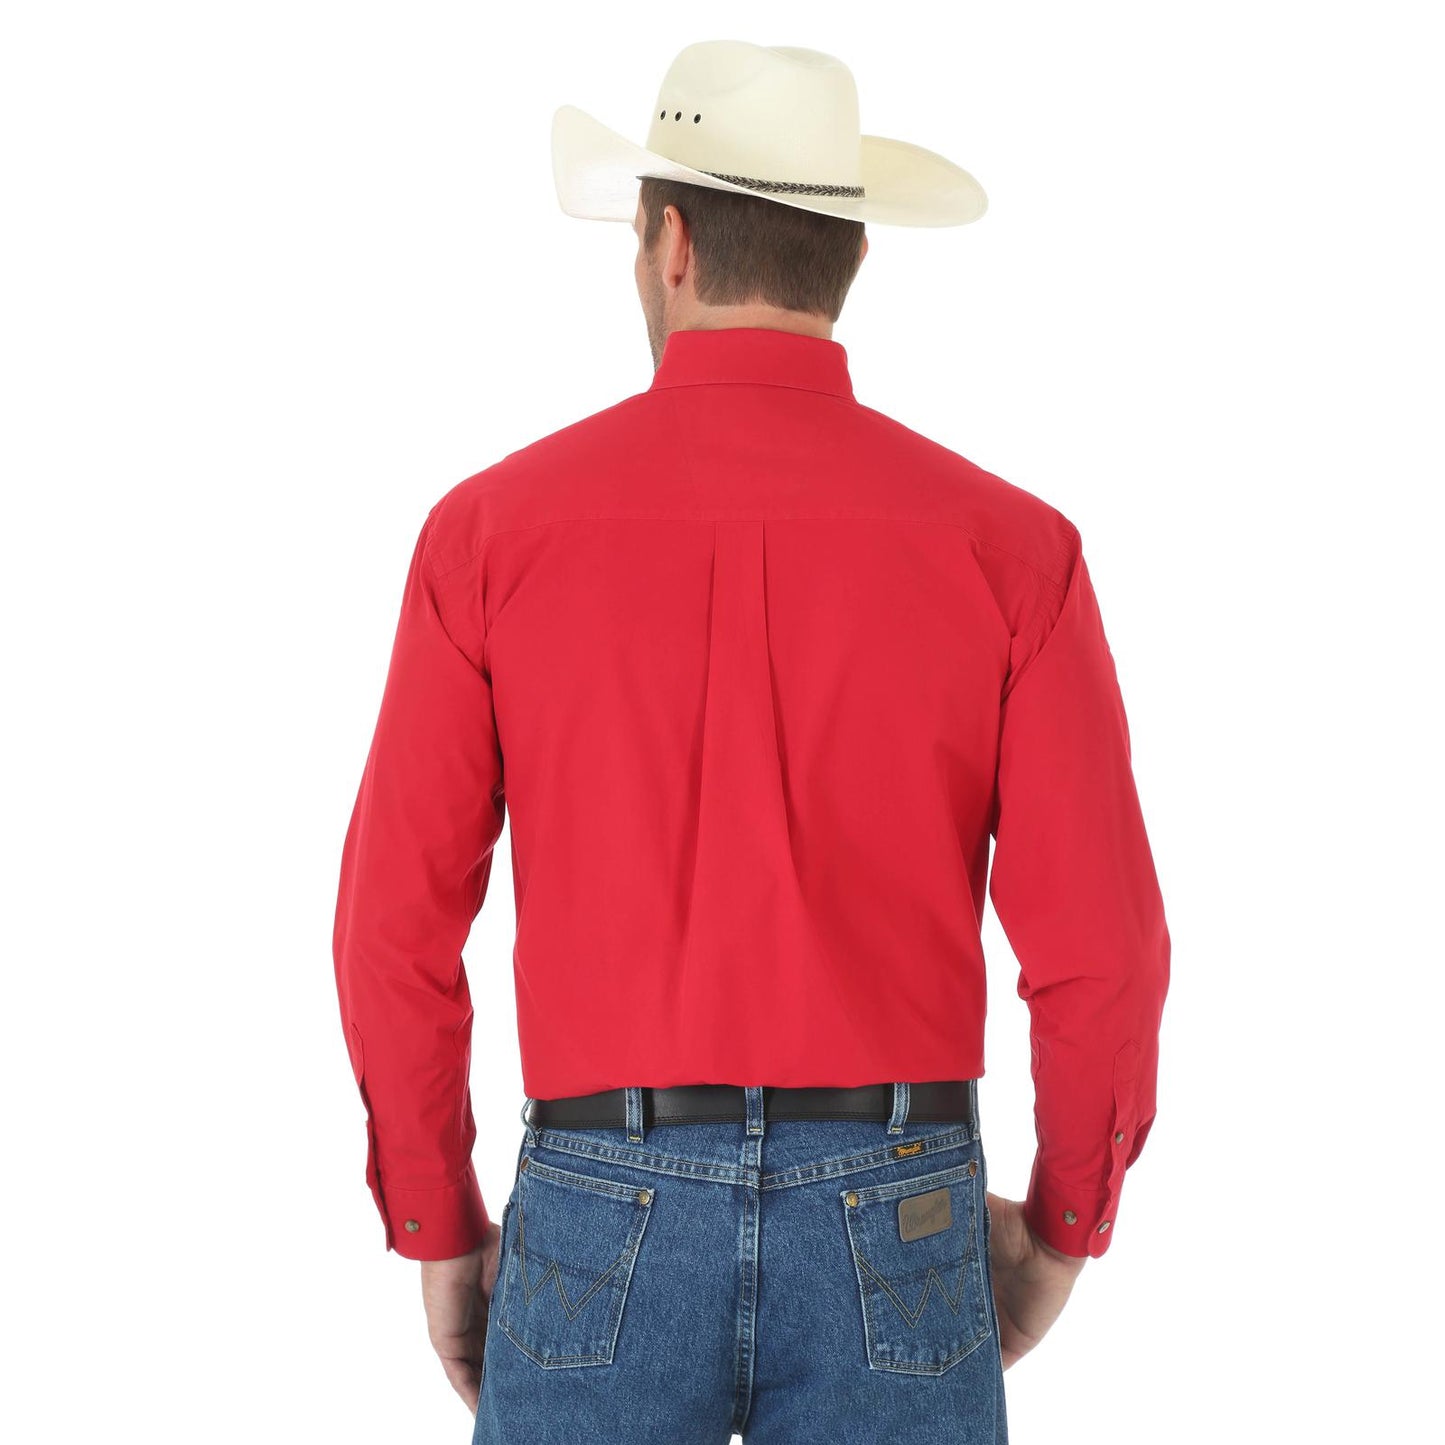 Top Men's (MGS274R) - Wrangler® George Straight Collection, Long Sleeve Shirt in Red